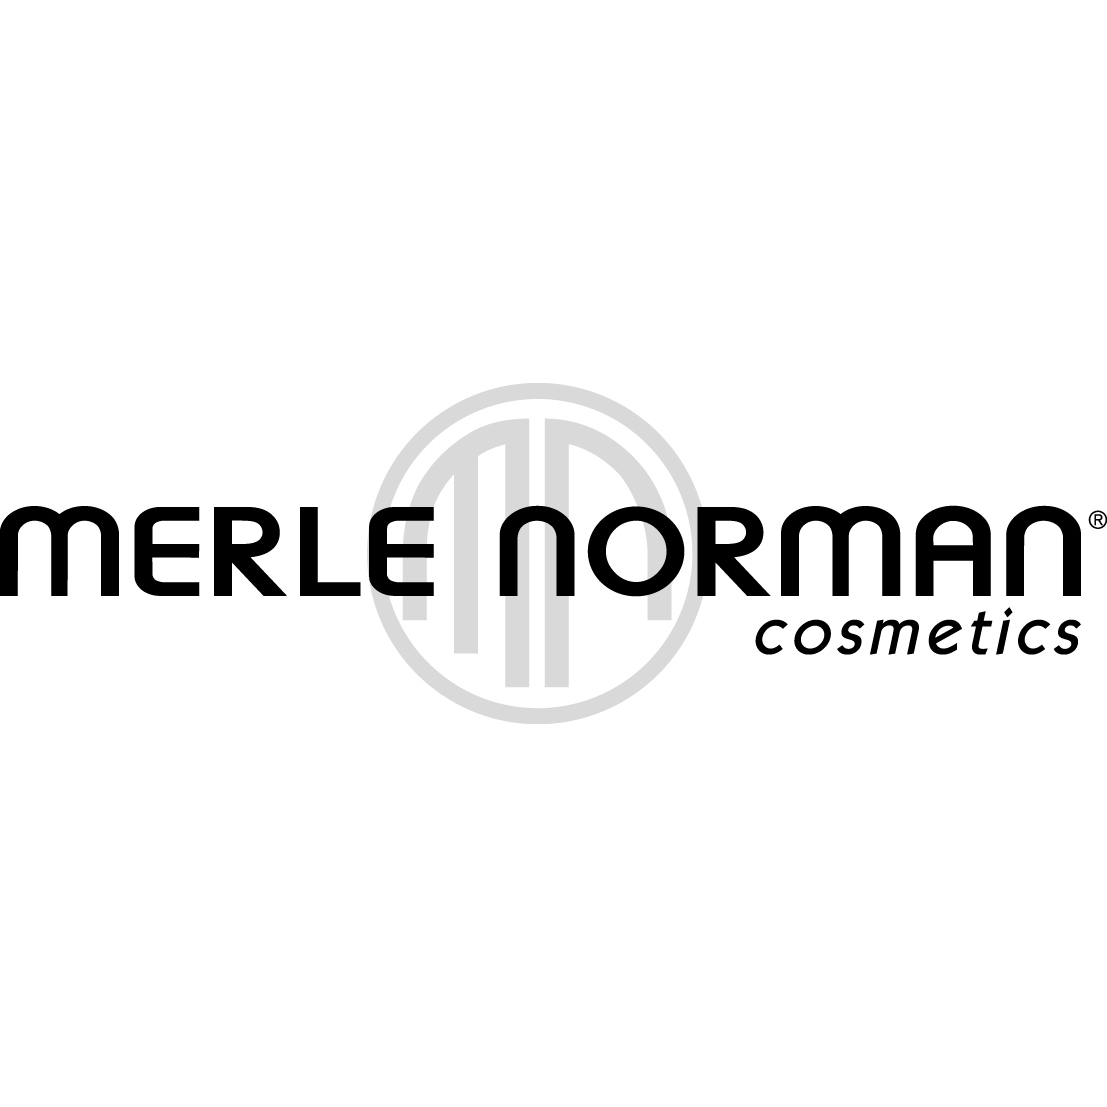 Merle Norman Cosmetics, Wigs and Boutique - Antioch, IL 60002 - (224)788-8820 | ShowMeLocal.com